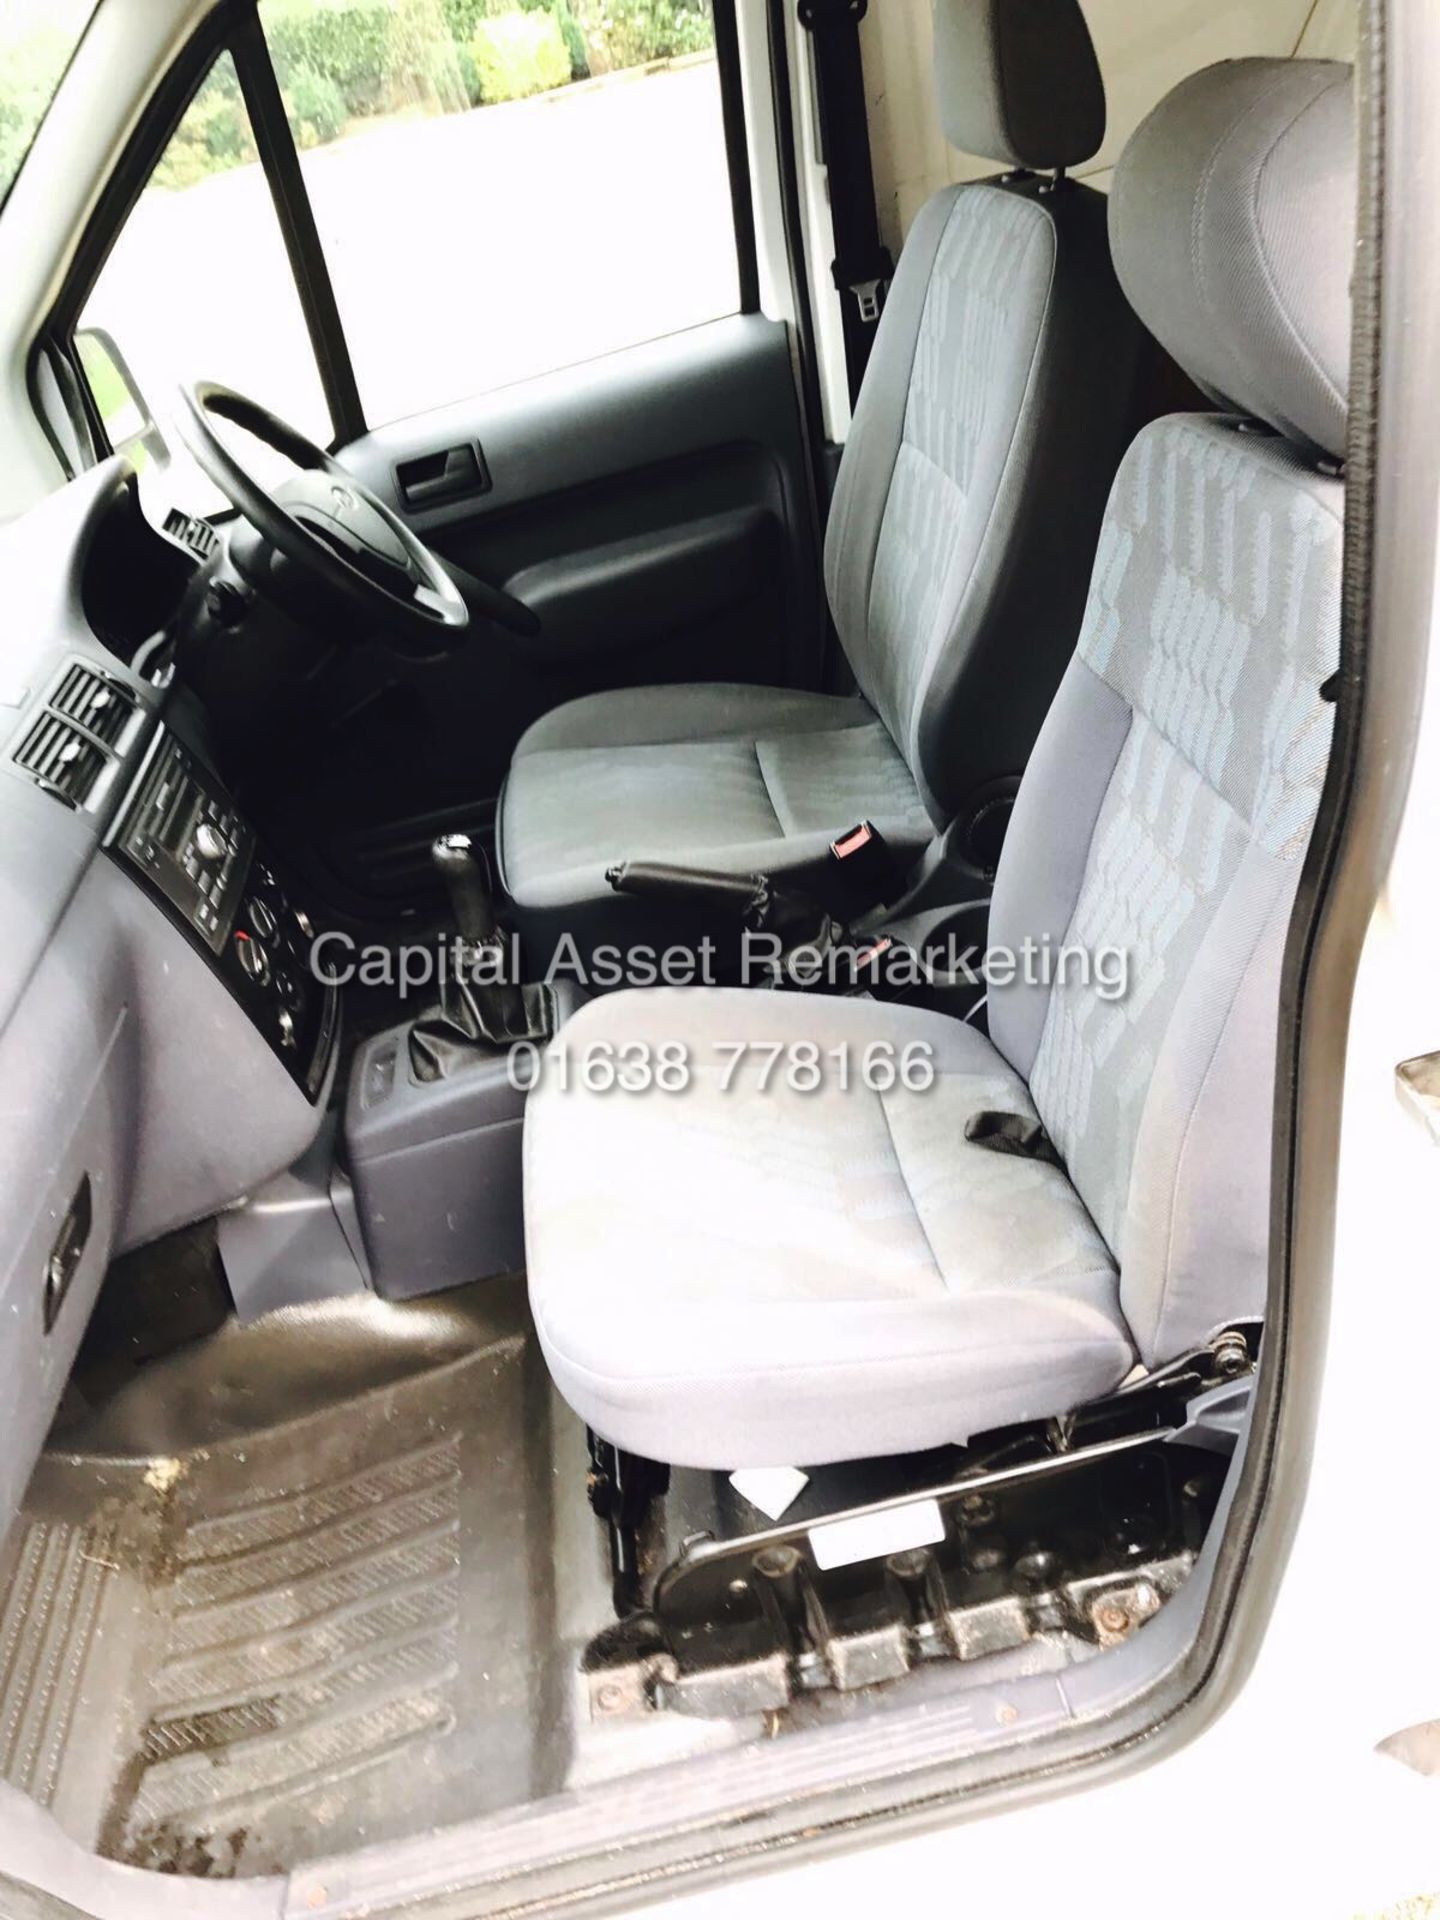 (ON SALE) FORD TRANSIT CONNECT 1.8TDCI T200 (2009-09 REG) ONLY 25,000 MILES, SLD (NO VAT !!) - Image 9 of 13